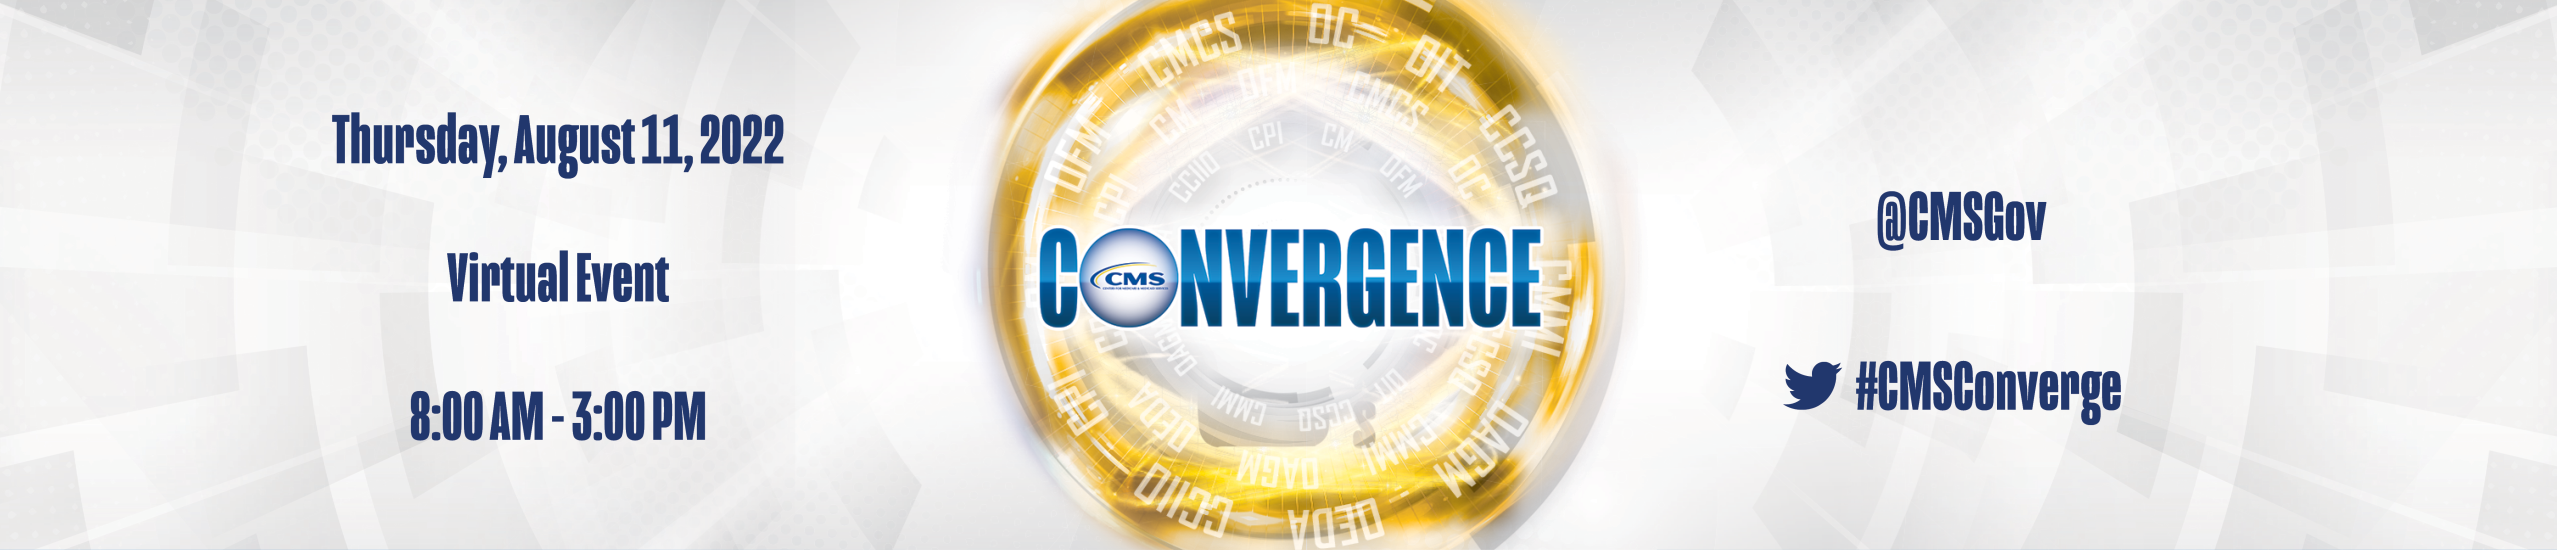 Convergence 2022: Centers for Medicare and Medicaid